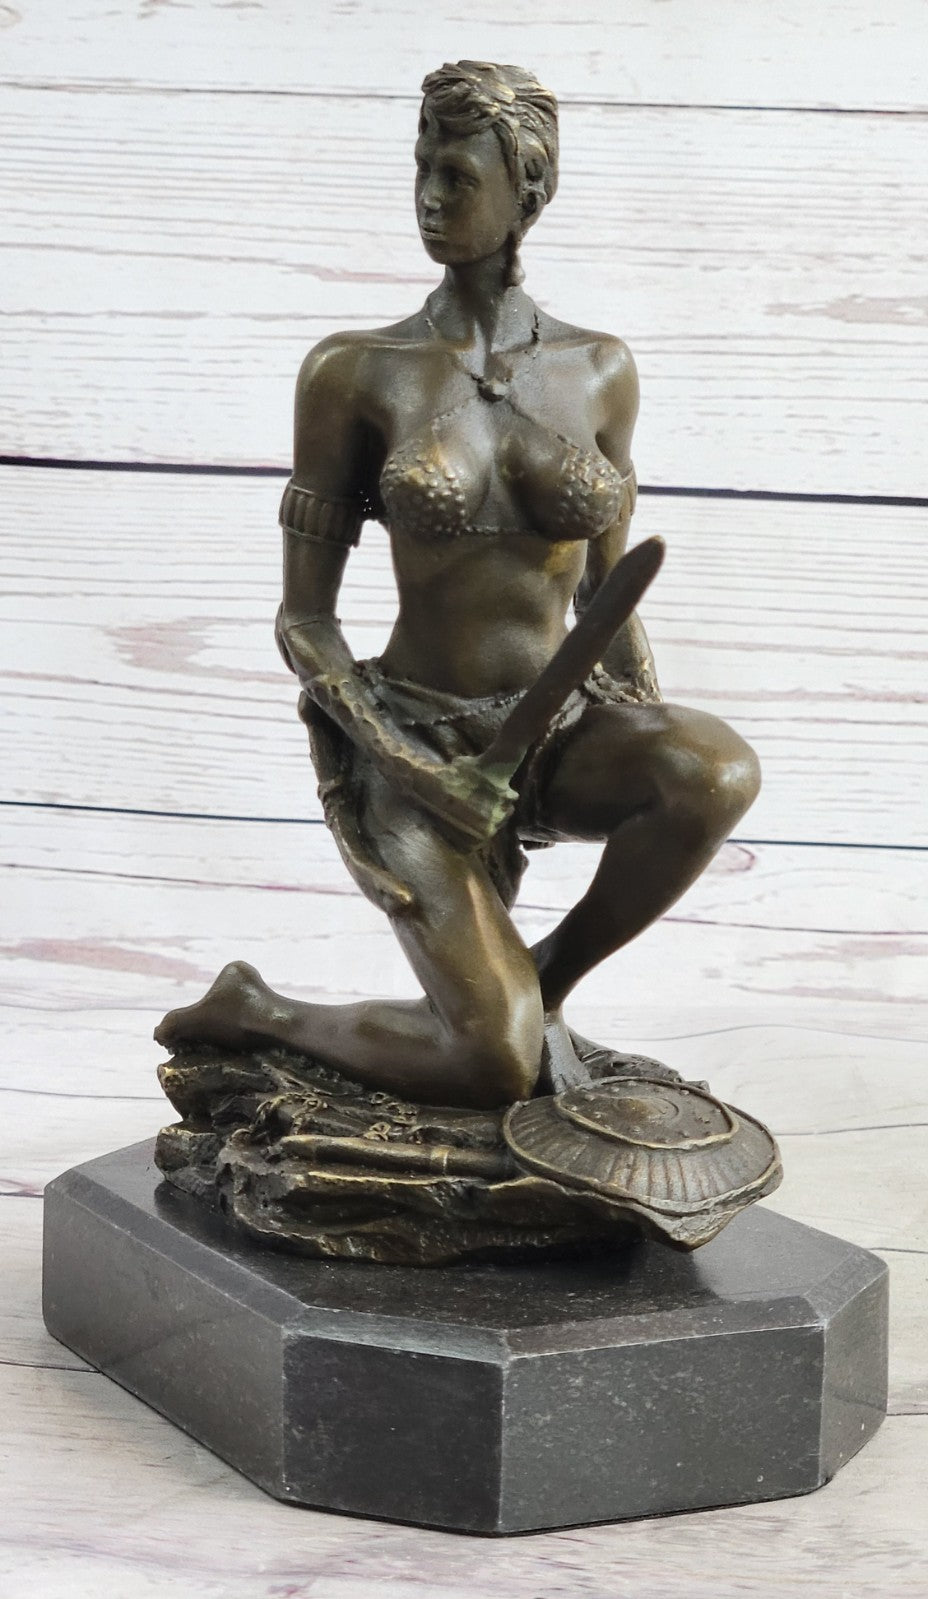 Handcrafted bronze sculpture SALE Sword With Woman Nude "Amazon" Signed Decor